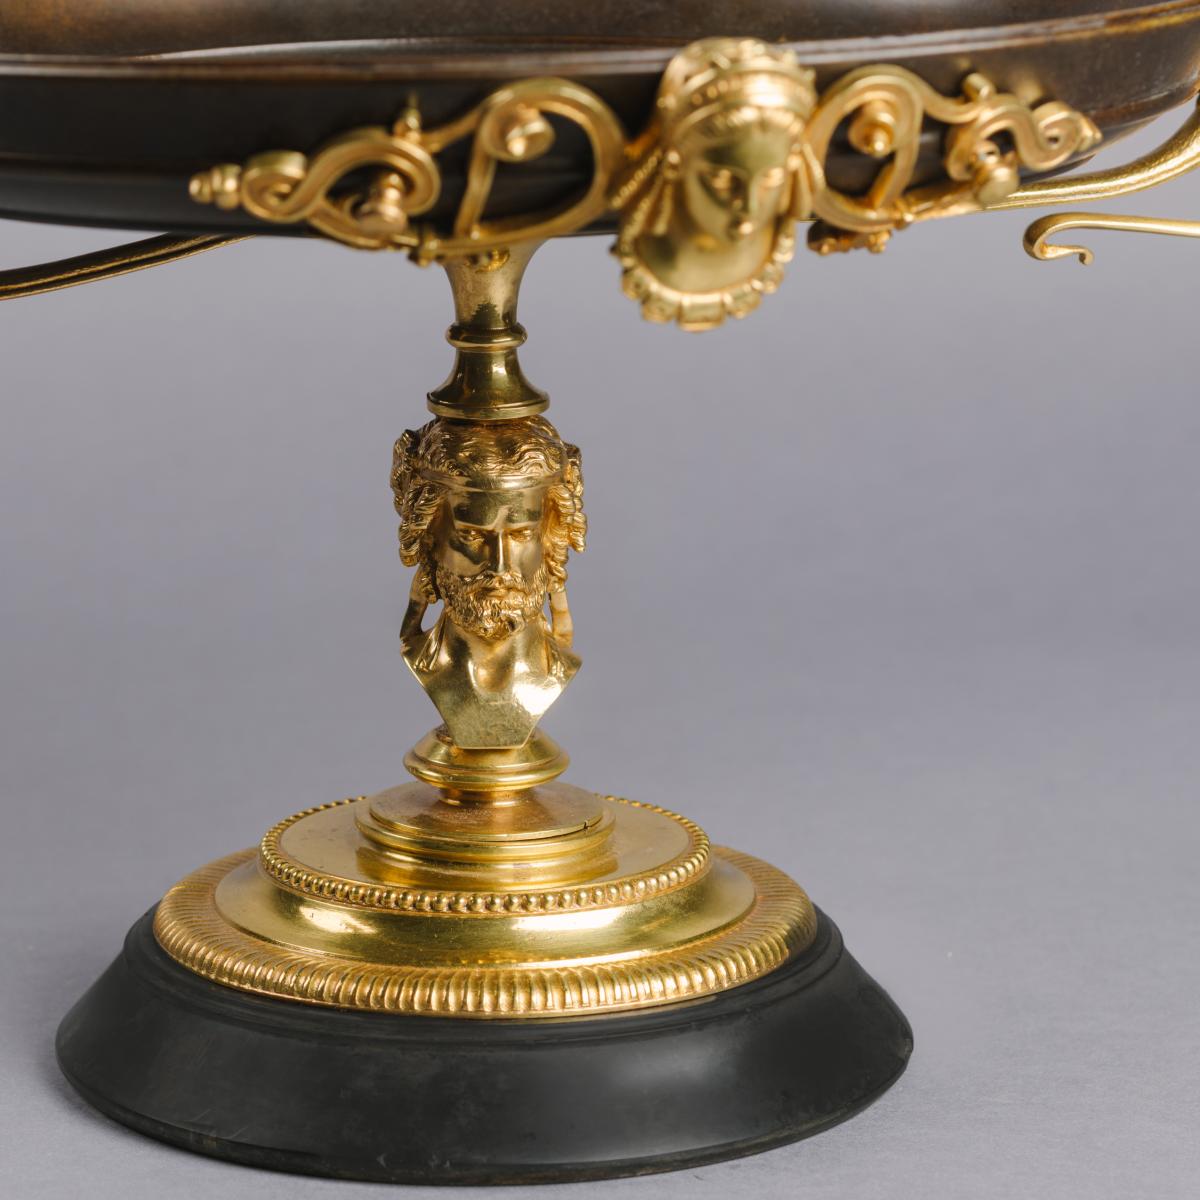 Neoclassical Revival Gilt and Patinated Bronze Tazza